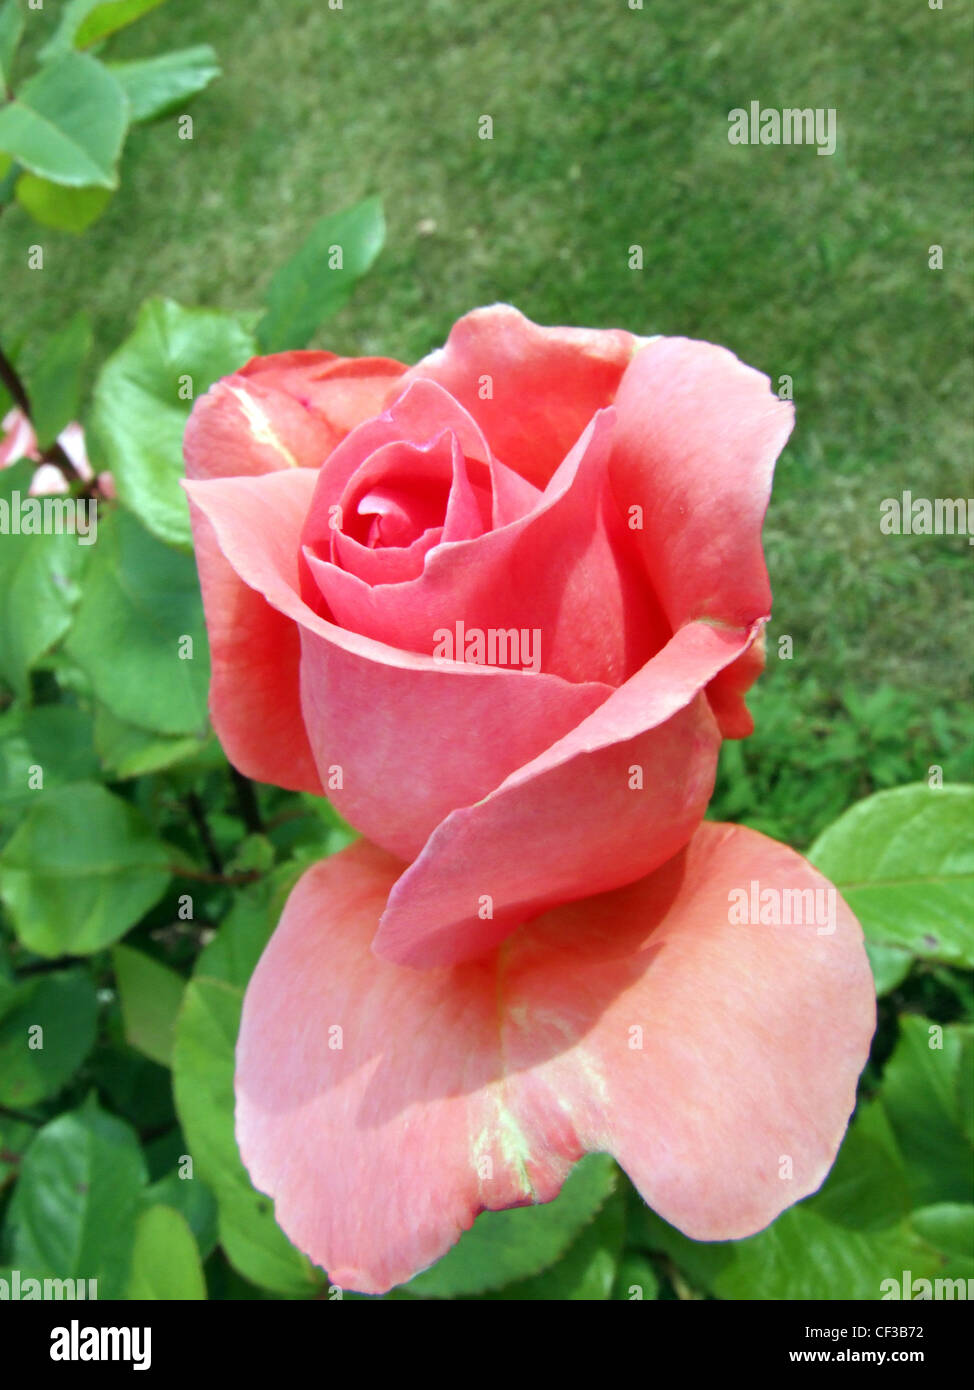 Close up of a pink rose -Hybrid Tea Rose, Rosa Blessings Stock Photo